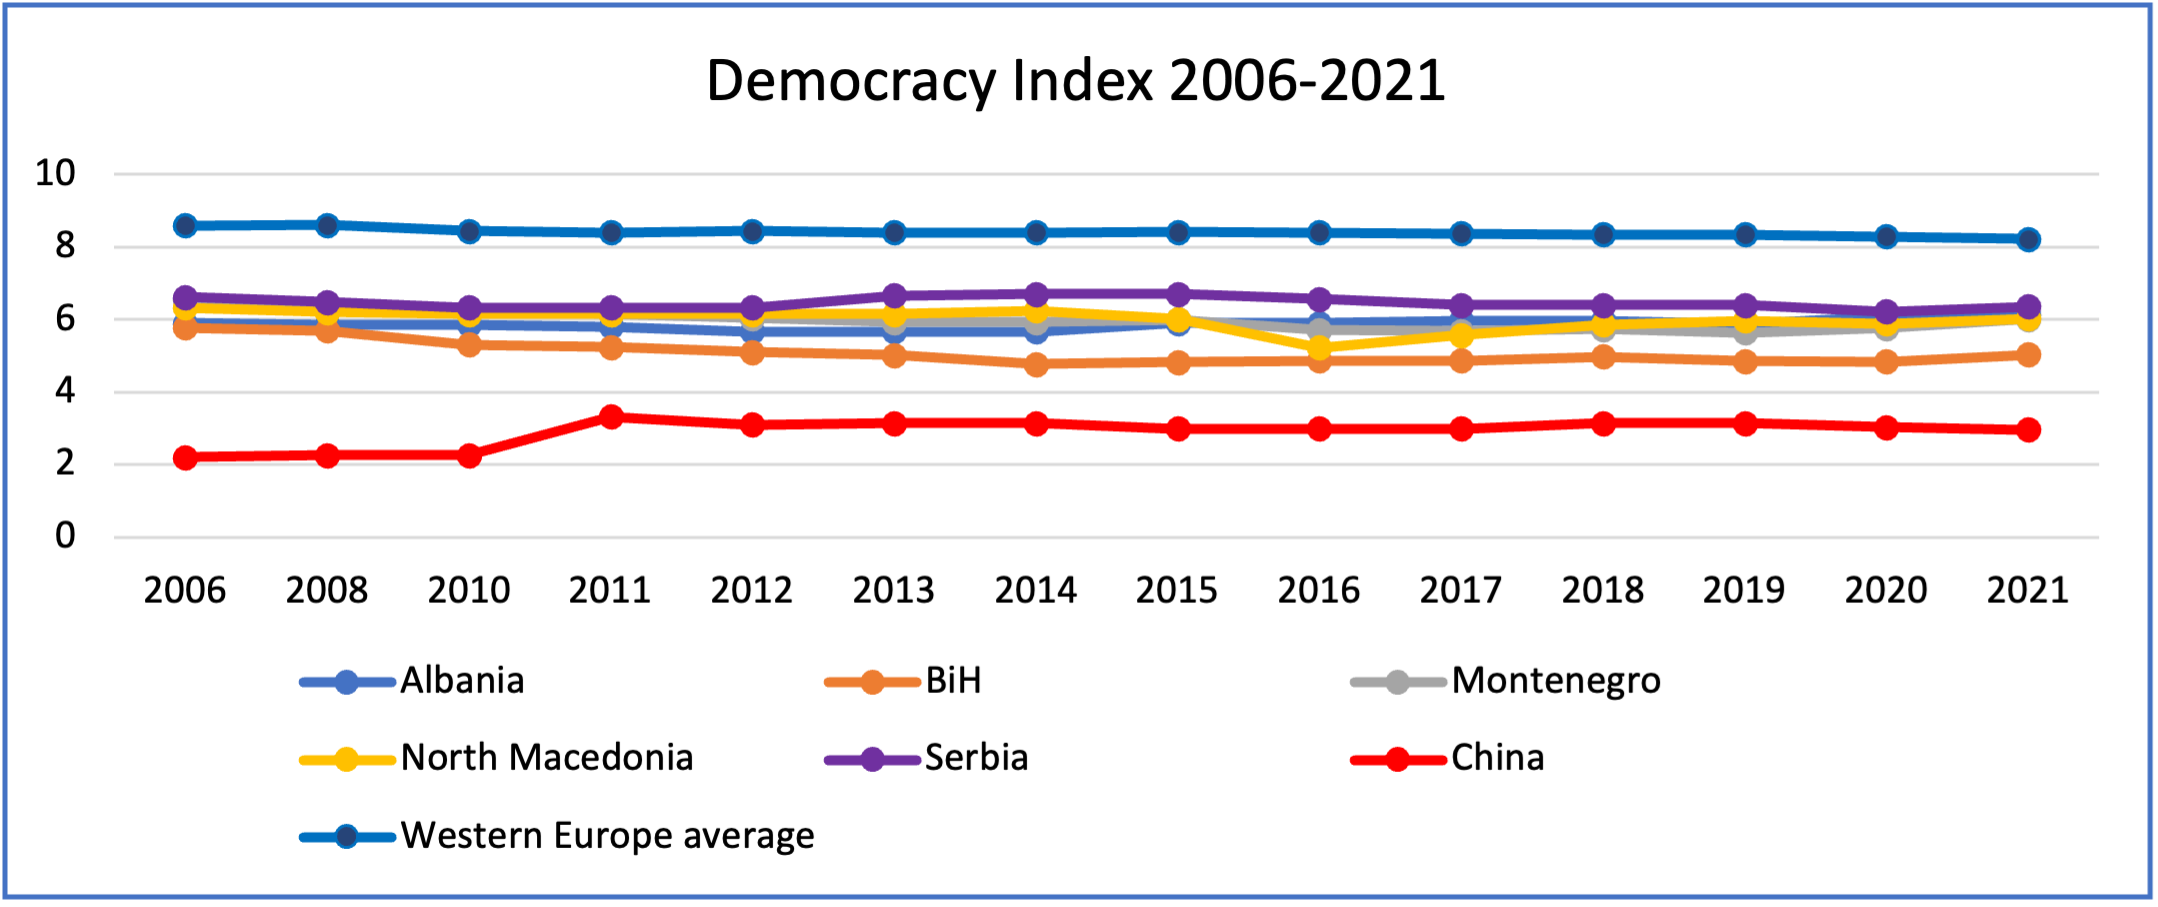 Democratic Trends in the Western Balkans compared to average Western European countries and China  (2006-2021)